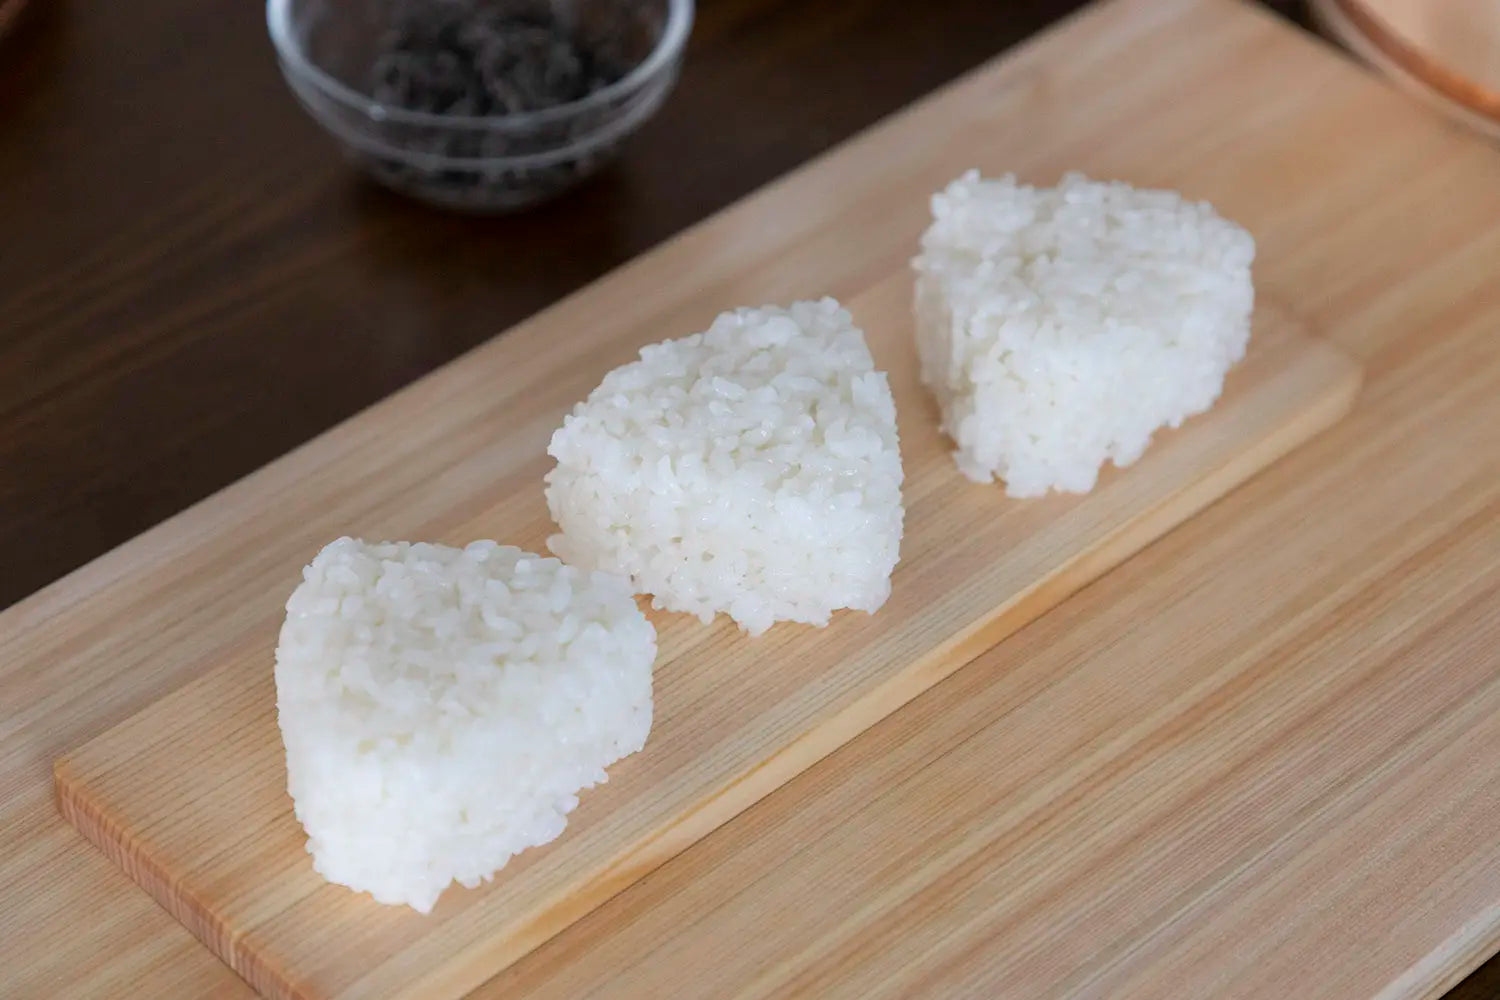 Finished onigiri made with a Tamacoh mold